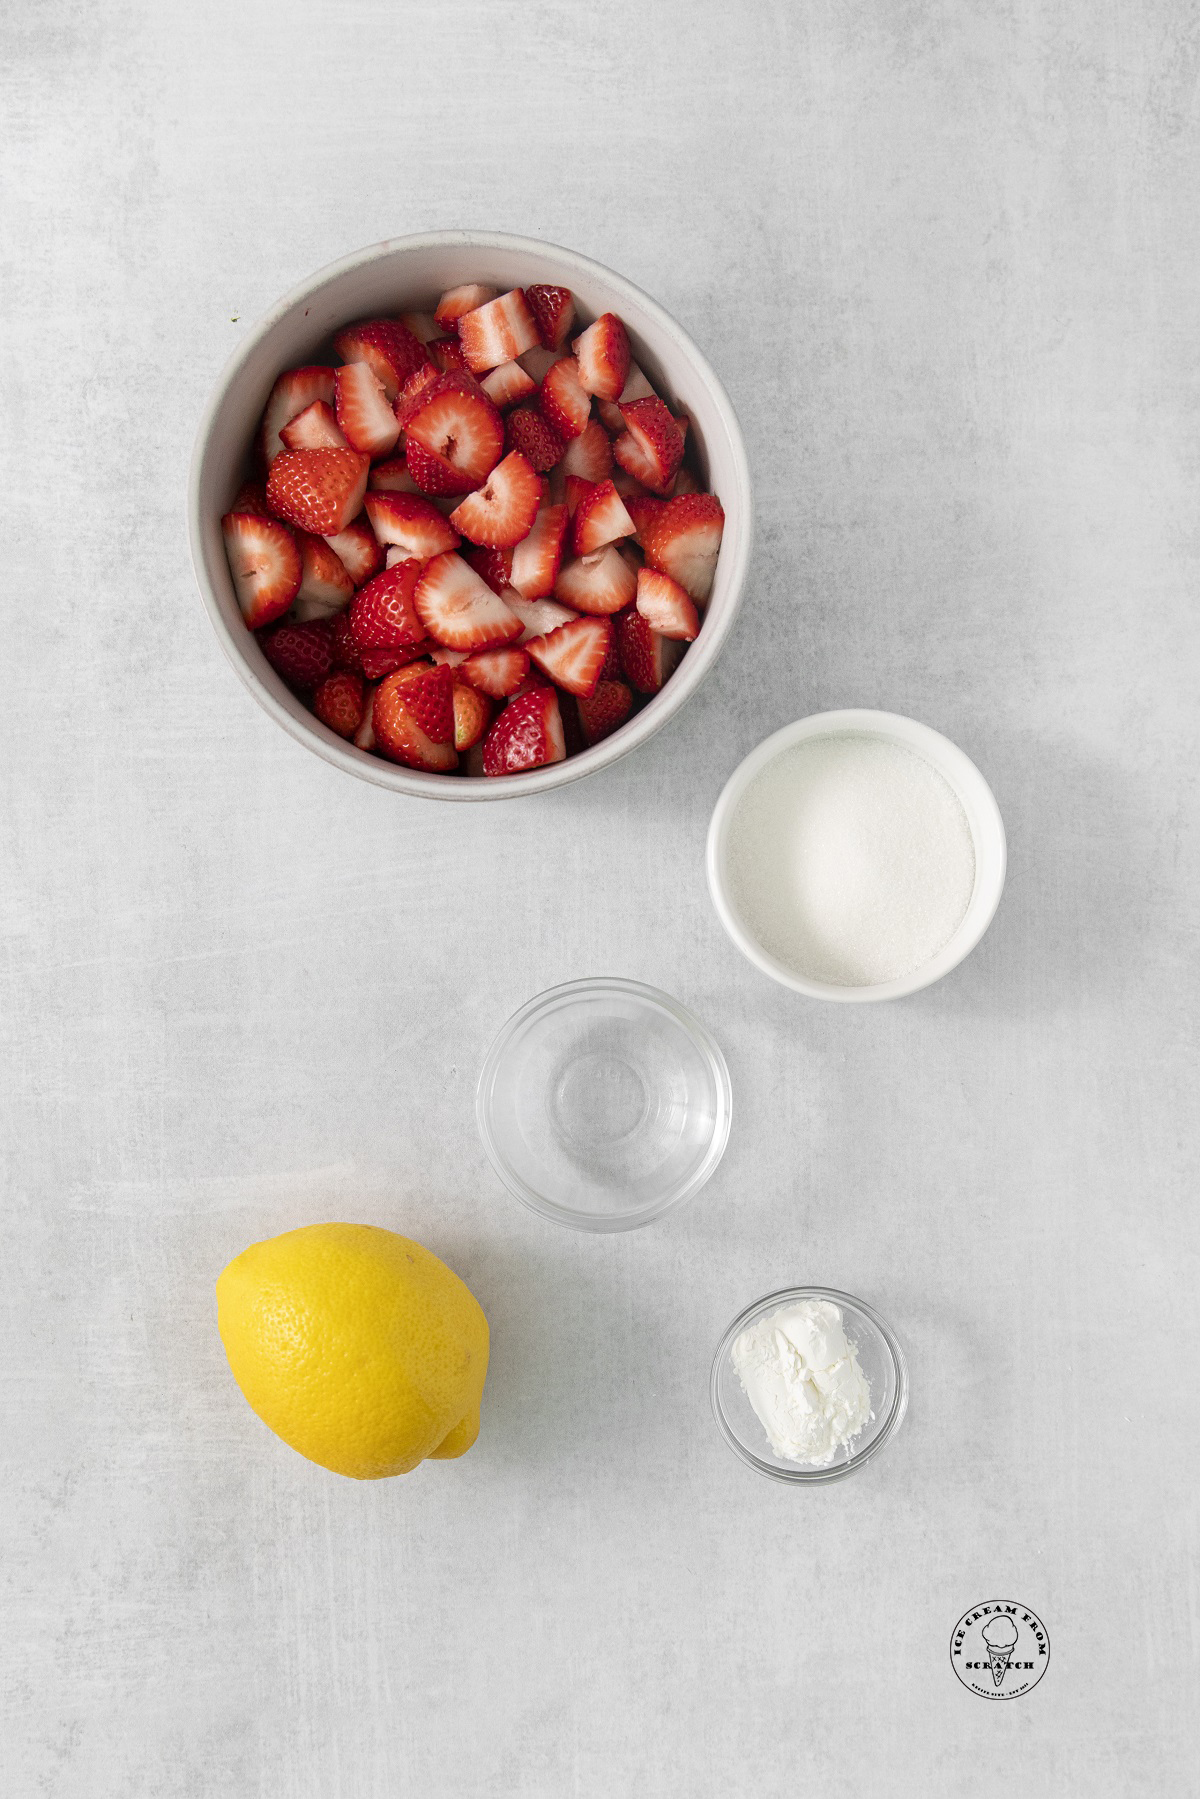 the ingredients for strawberry compote, including fresh berries, sugar, and lemon.